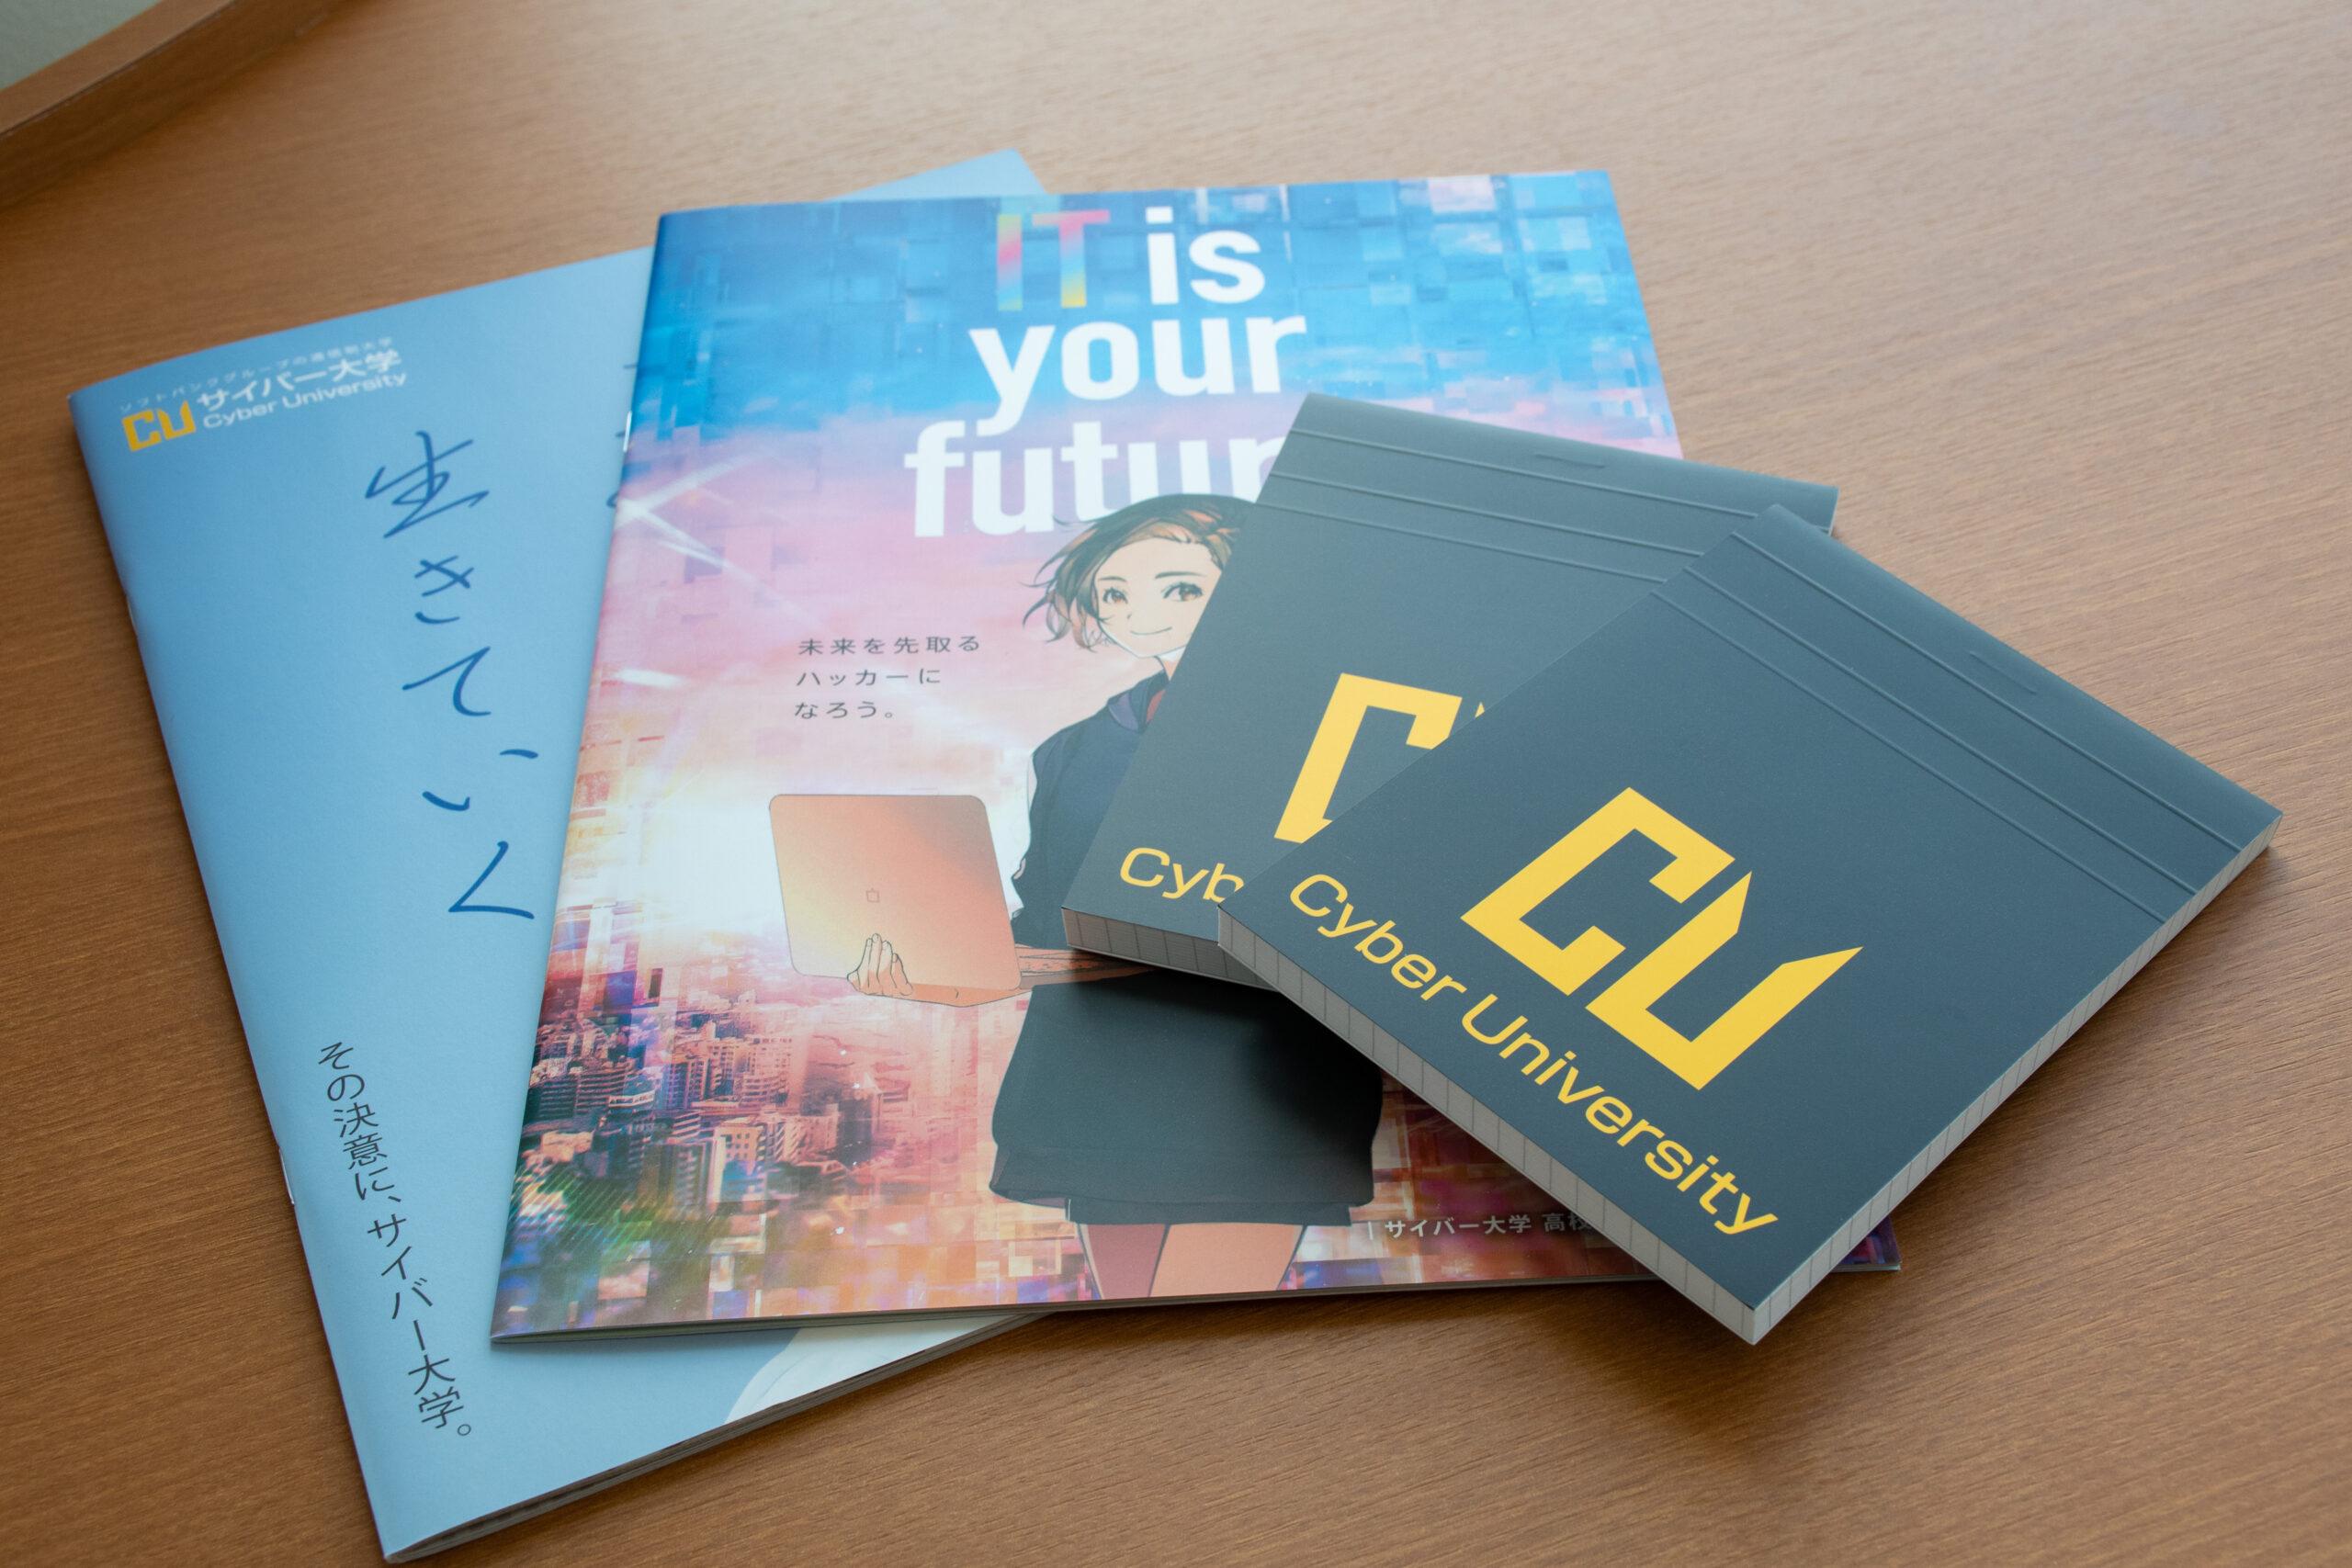 Picture of educational materials at Cyber University